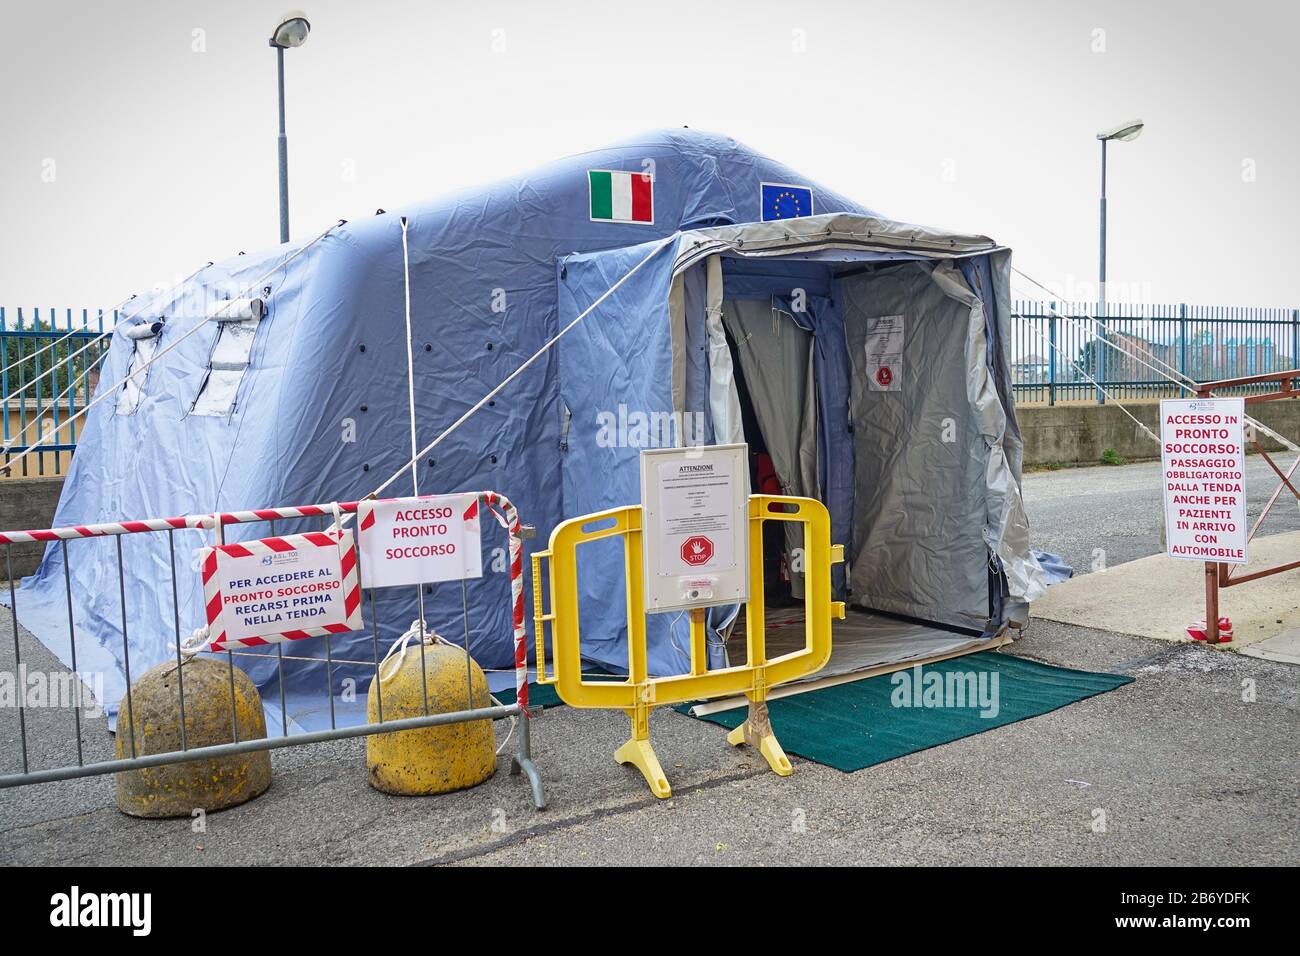 The triage tent outside the hospital for the emergency caused by the spread of the Coronavirus. Milan, Italy - march 2020 Stock Photo